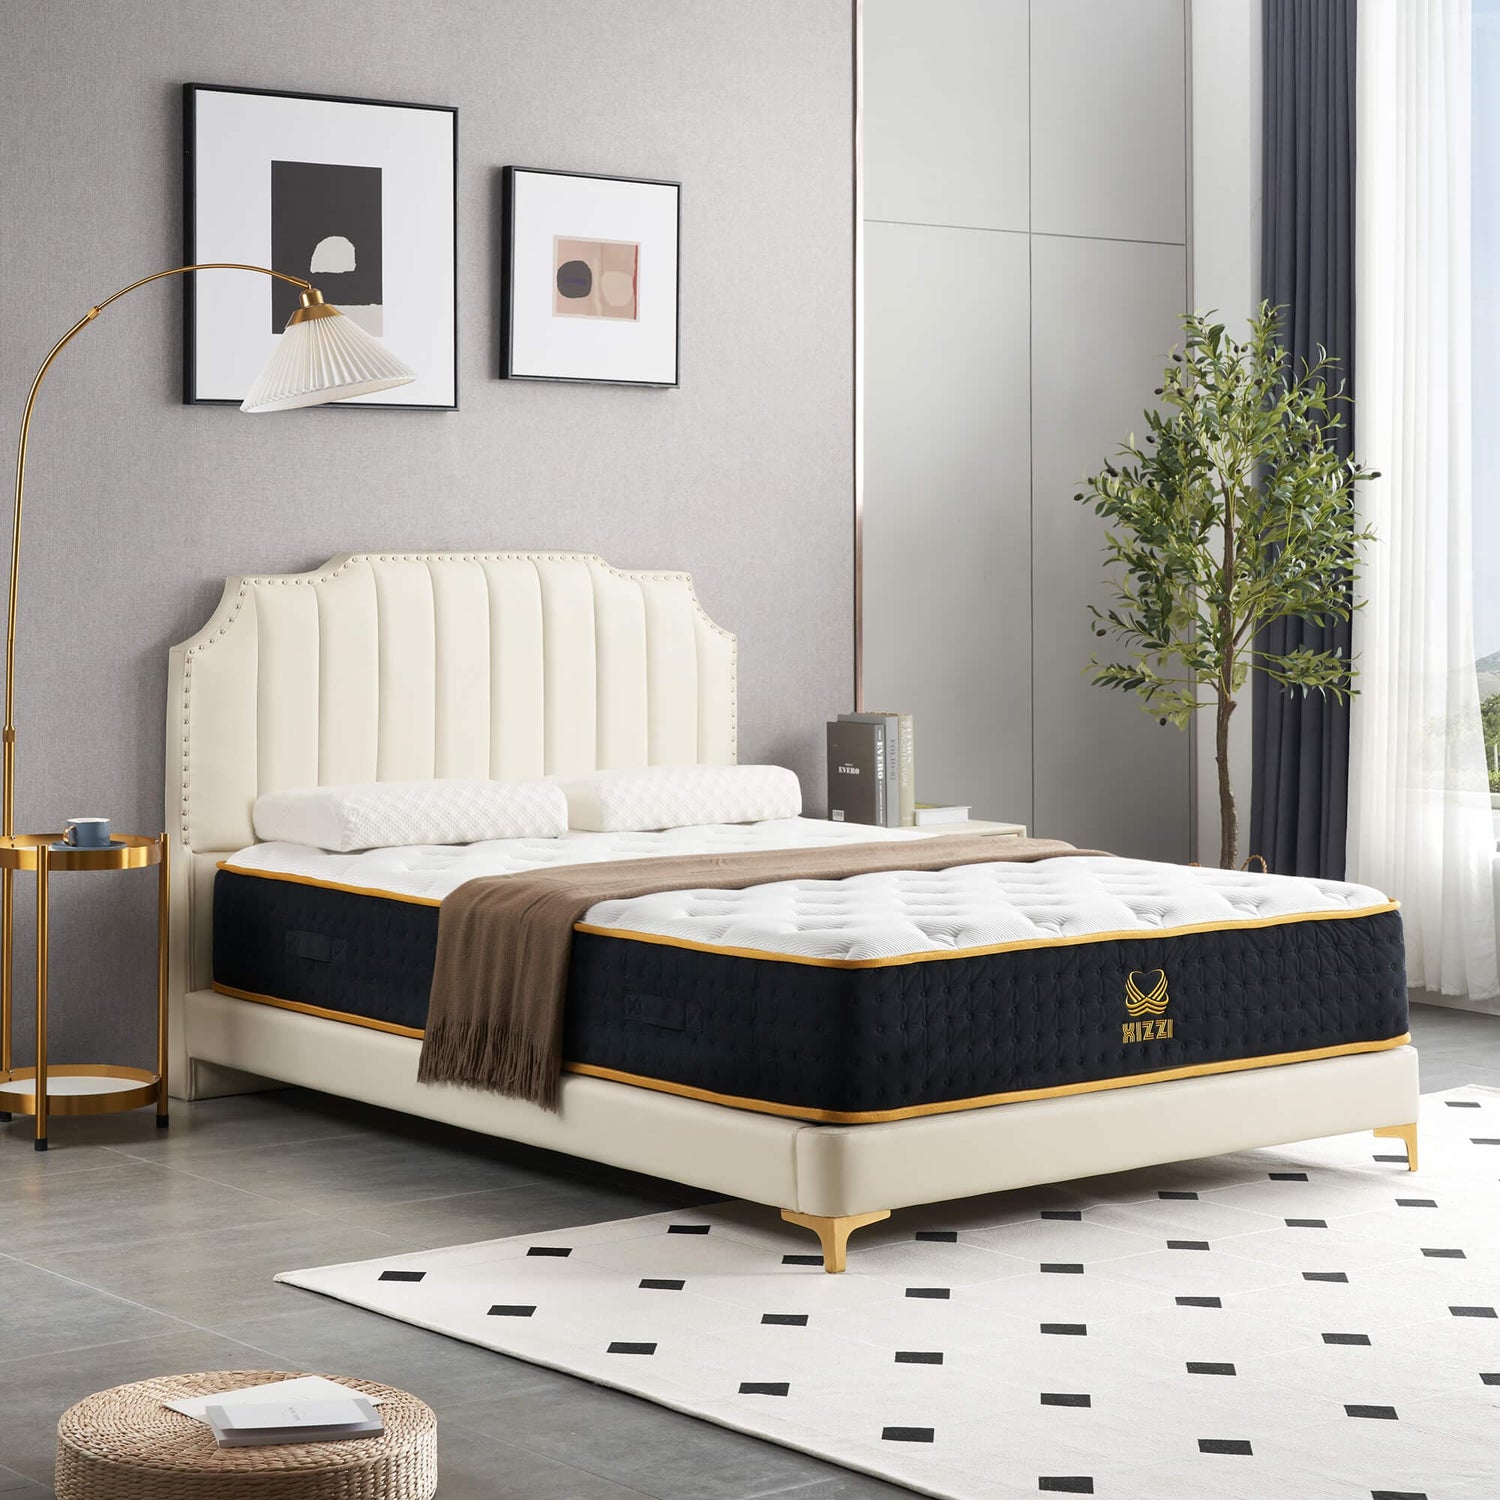 Choosing the Right Mattress for a Bed Bug-Free Bedroom